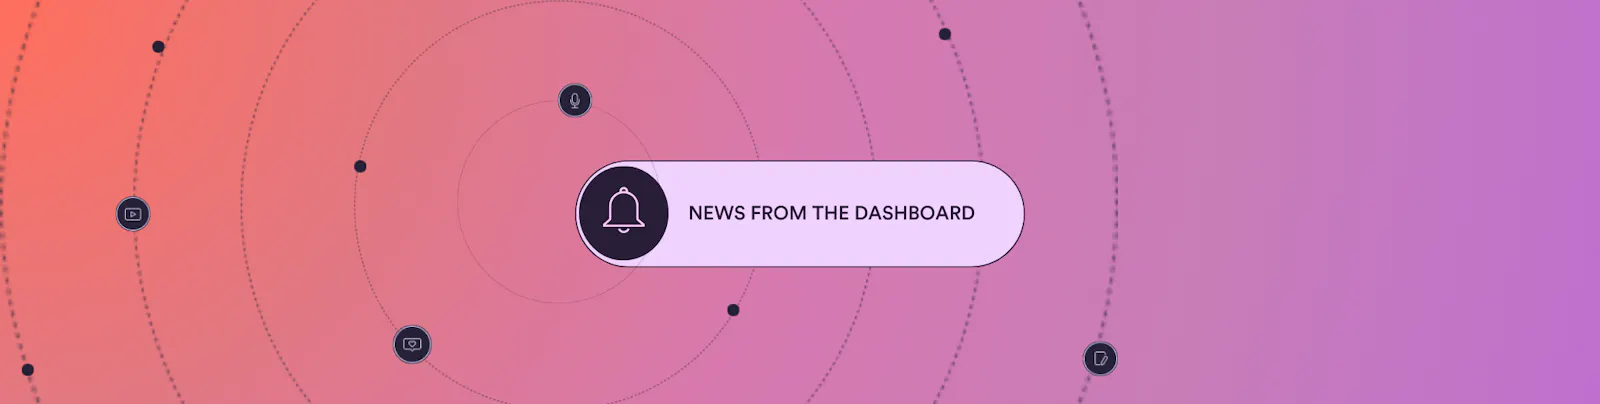 Steady Banner. Text on the banner: News From The Dashboard.